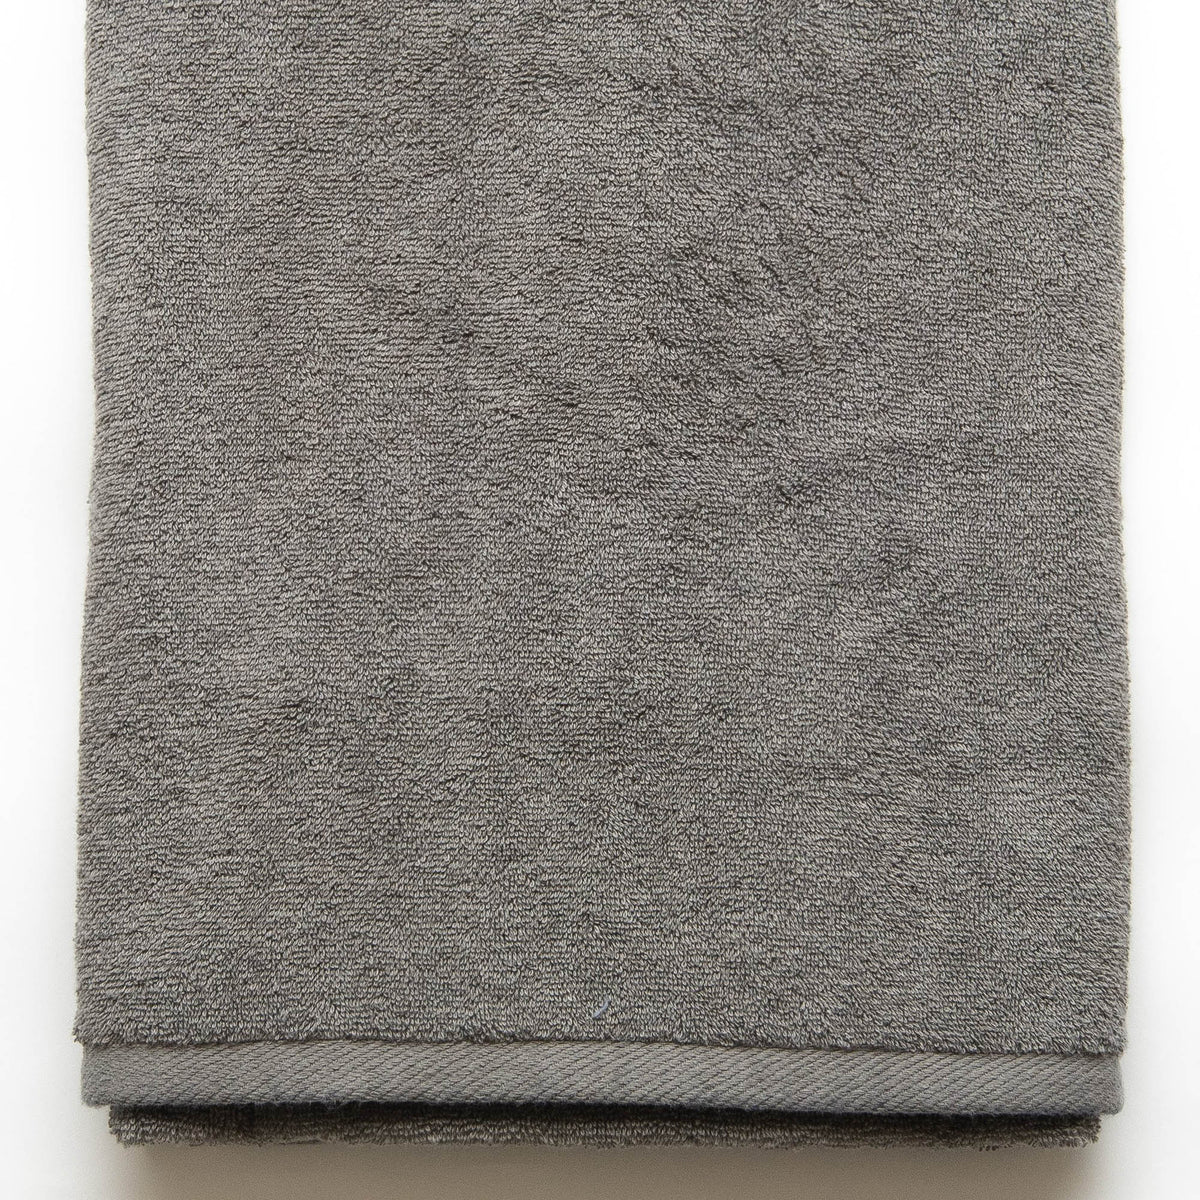 Gray - Colorful 100% Cotton Towels - American Blanket Company